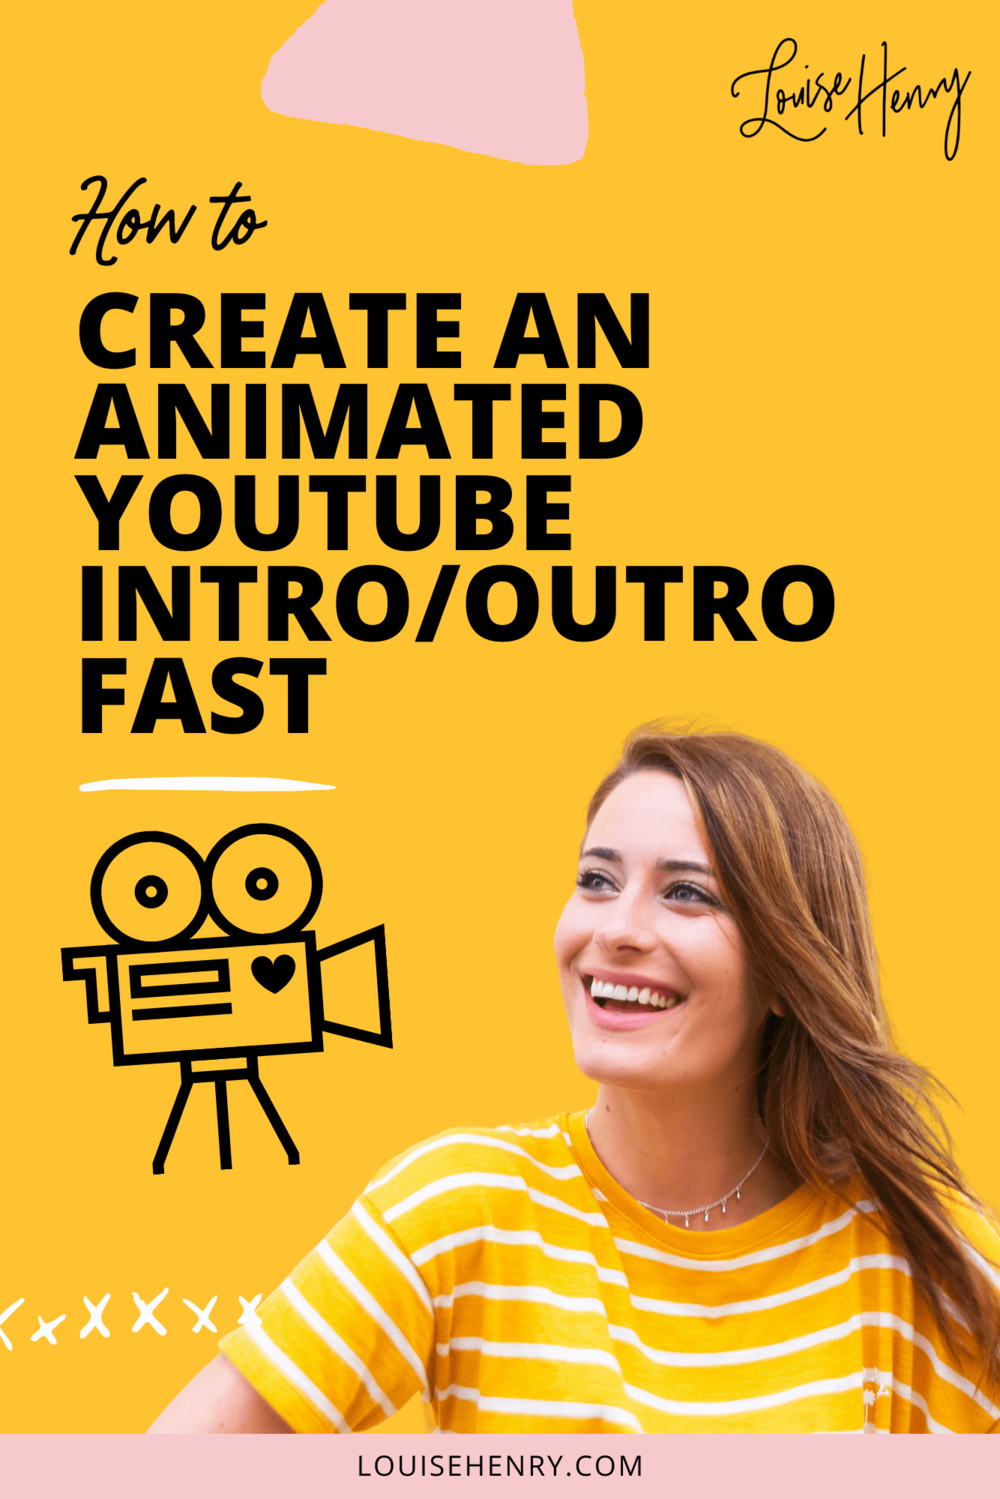 How to Make an Animated YouTube Intro and Outro FAST! — Louise Henry — Tech  Expert & Online Business Strategist